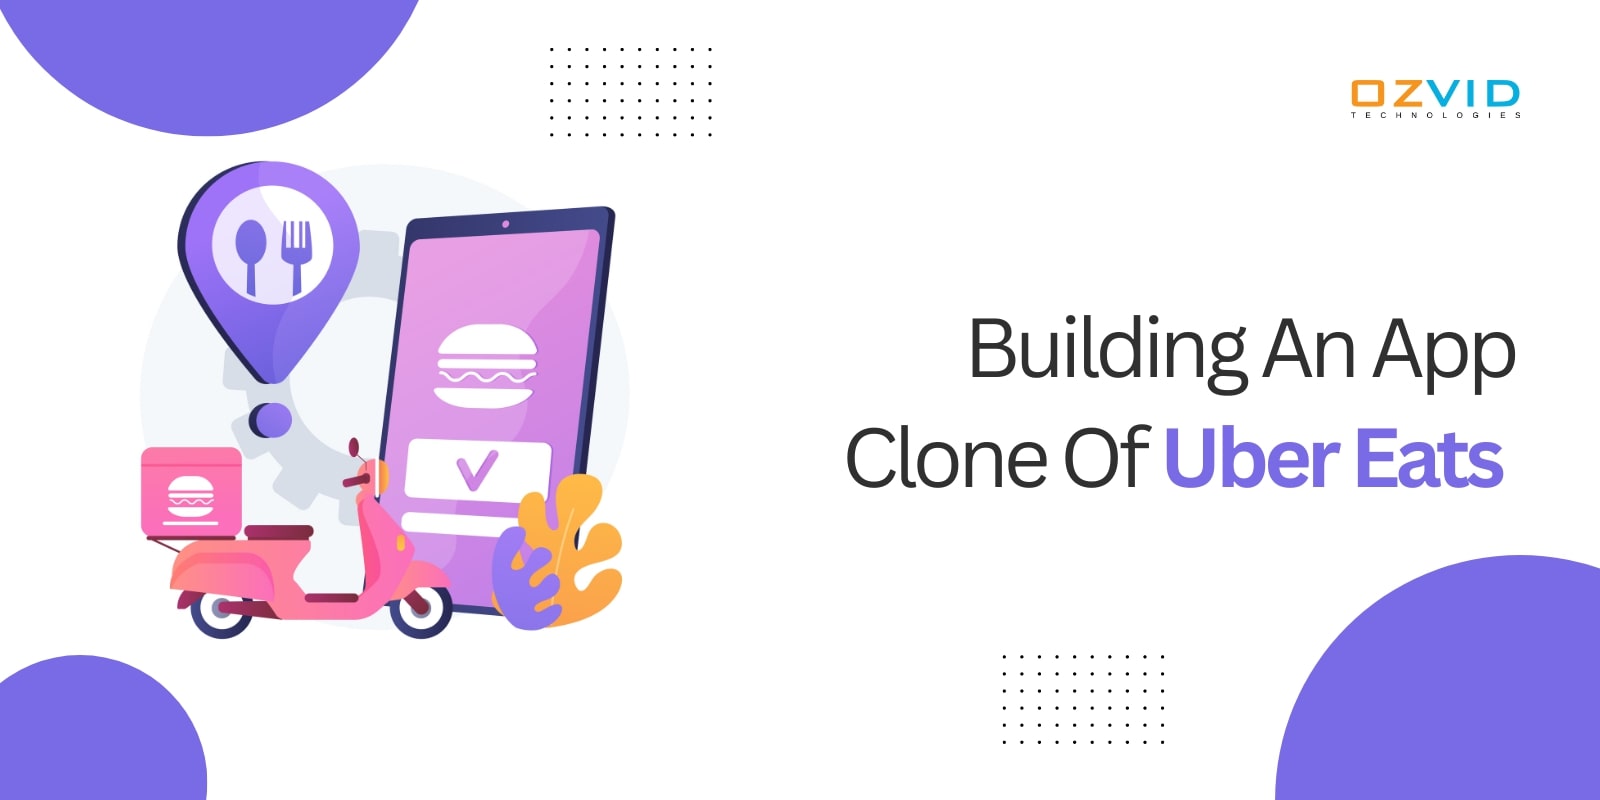 Building An App Clone Of Uber Eats | Business And Revenue Model Explained